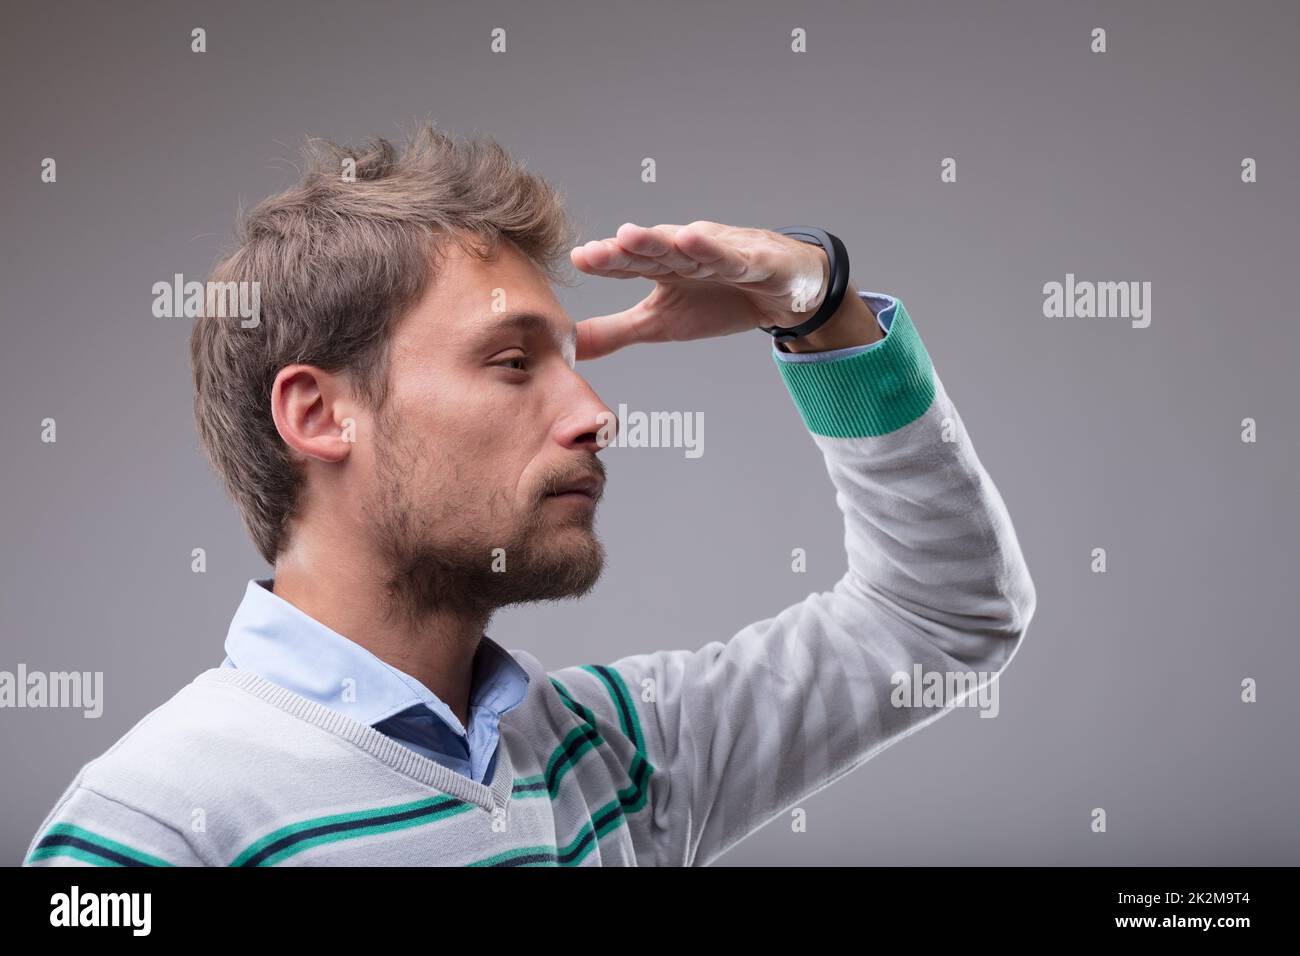 Blond man peering into the distance Stock Photo